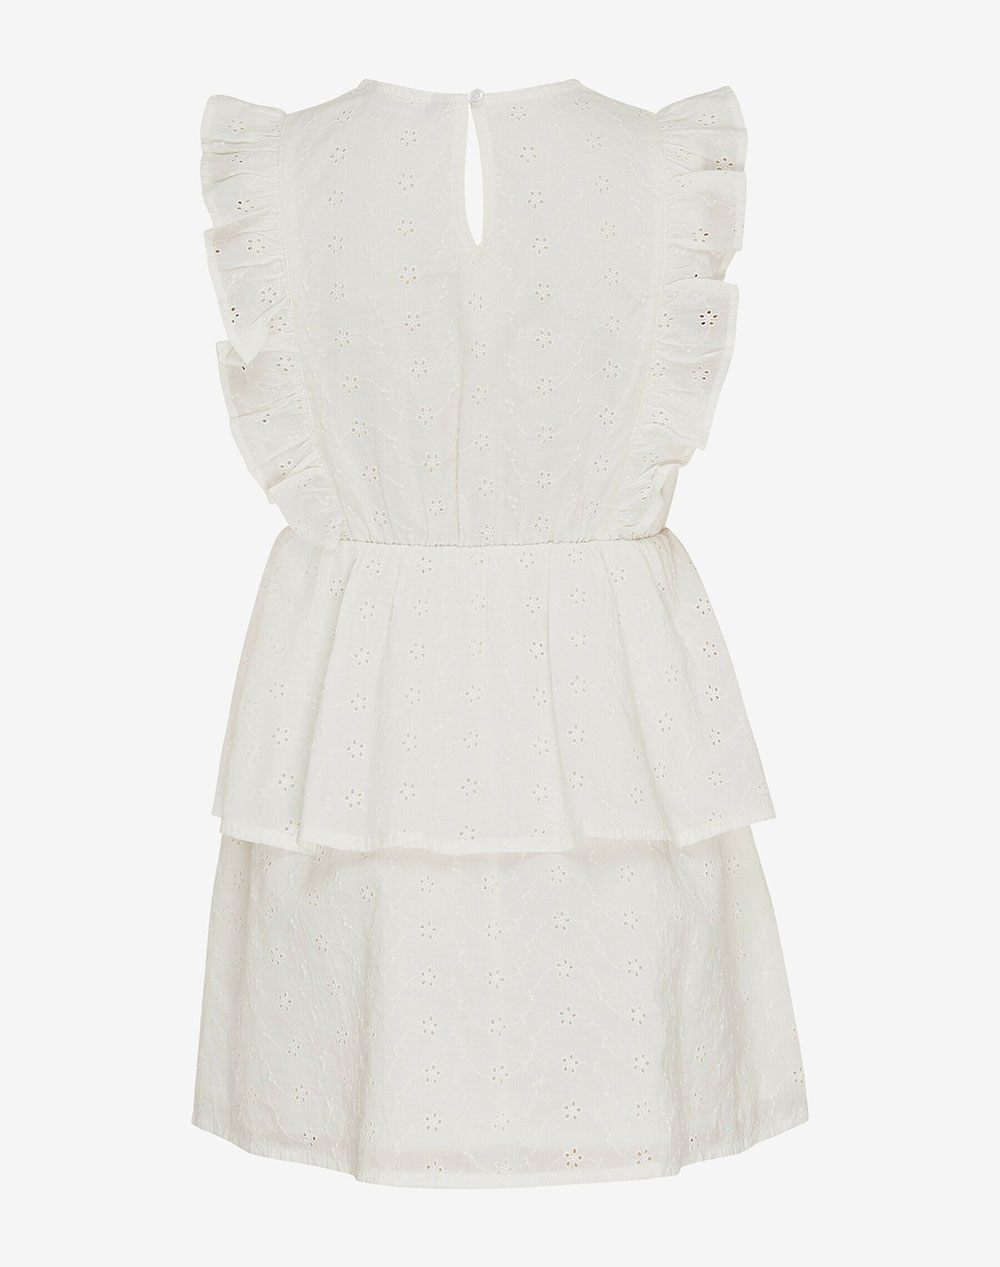 MEXX Broderie dress with ruffles